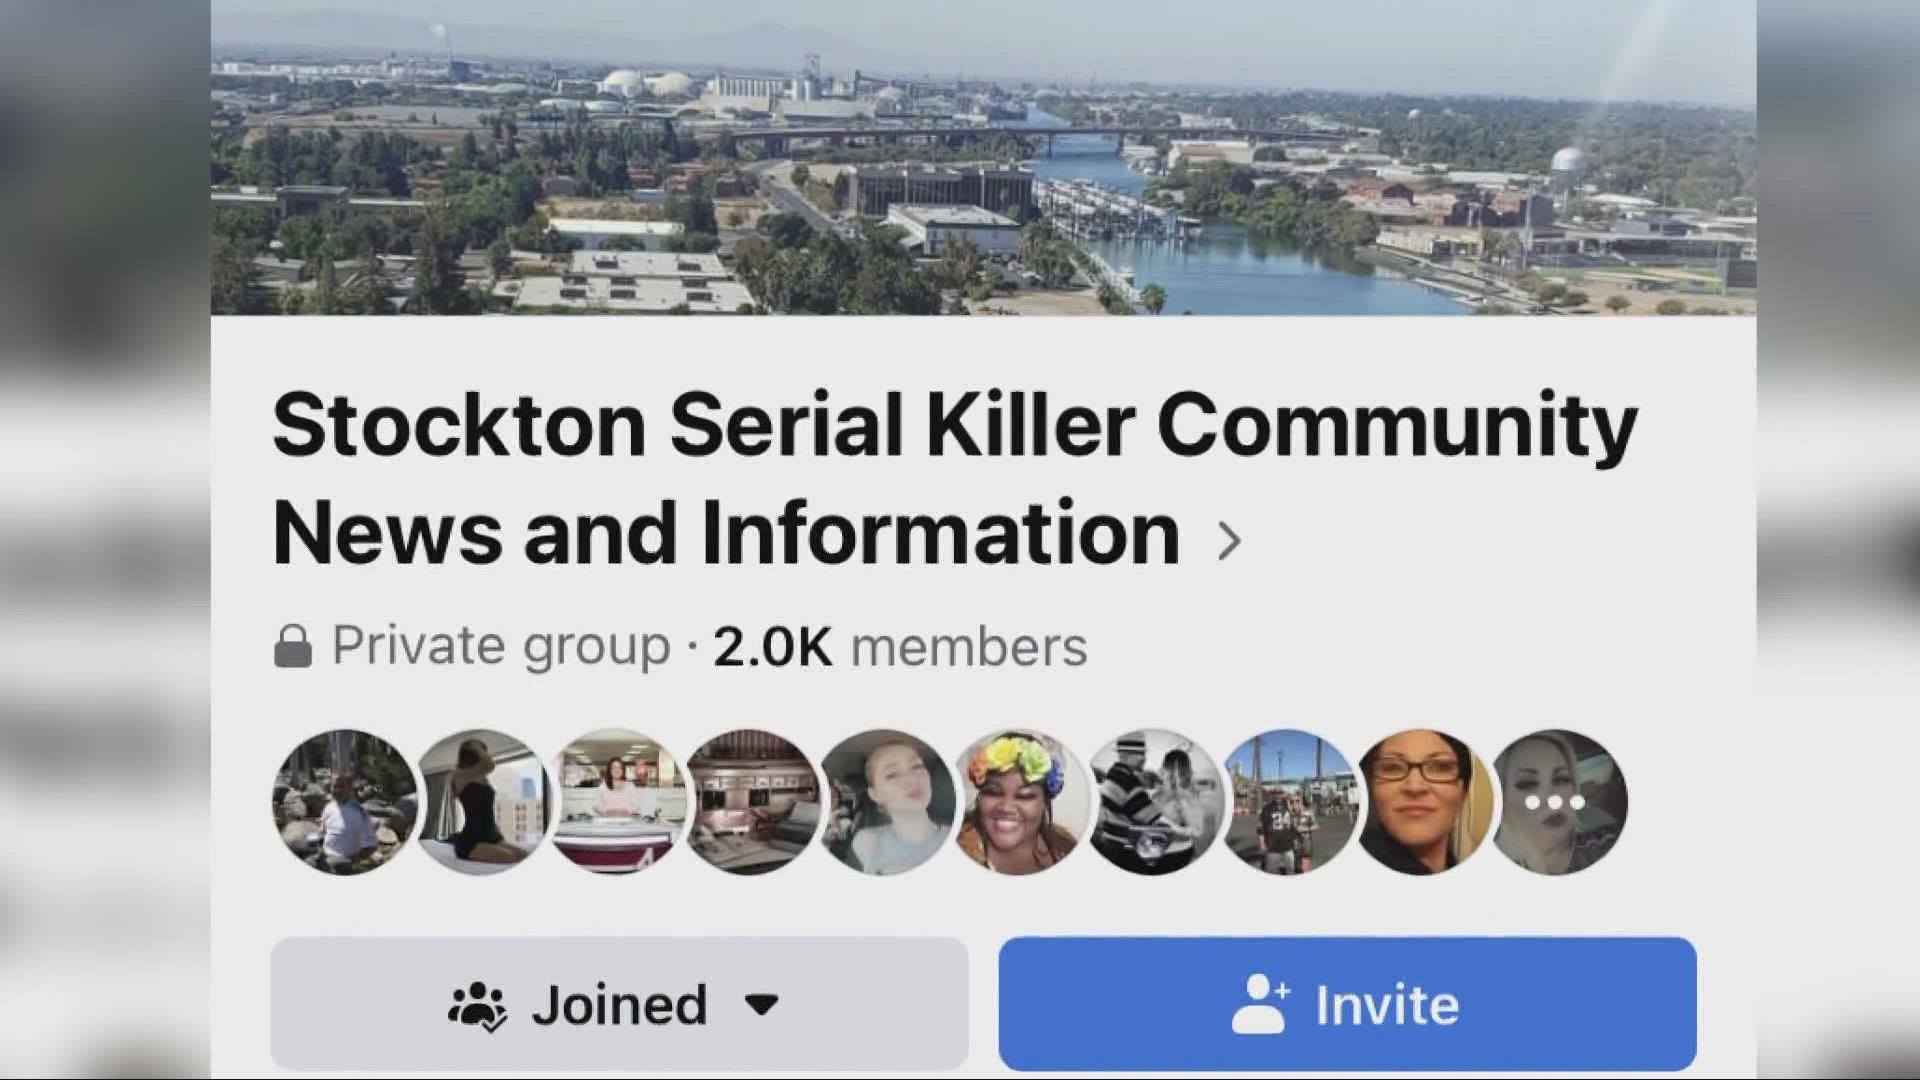 Nearly 2,000 people joined a Facebook group where members offer support to others in the community who feel unsettled as well as share tips to help find the killer.